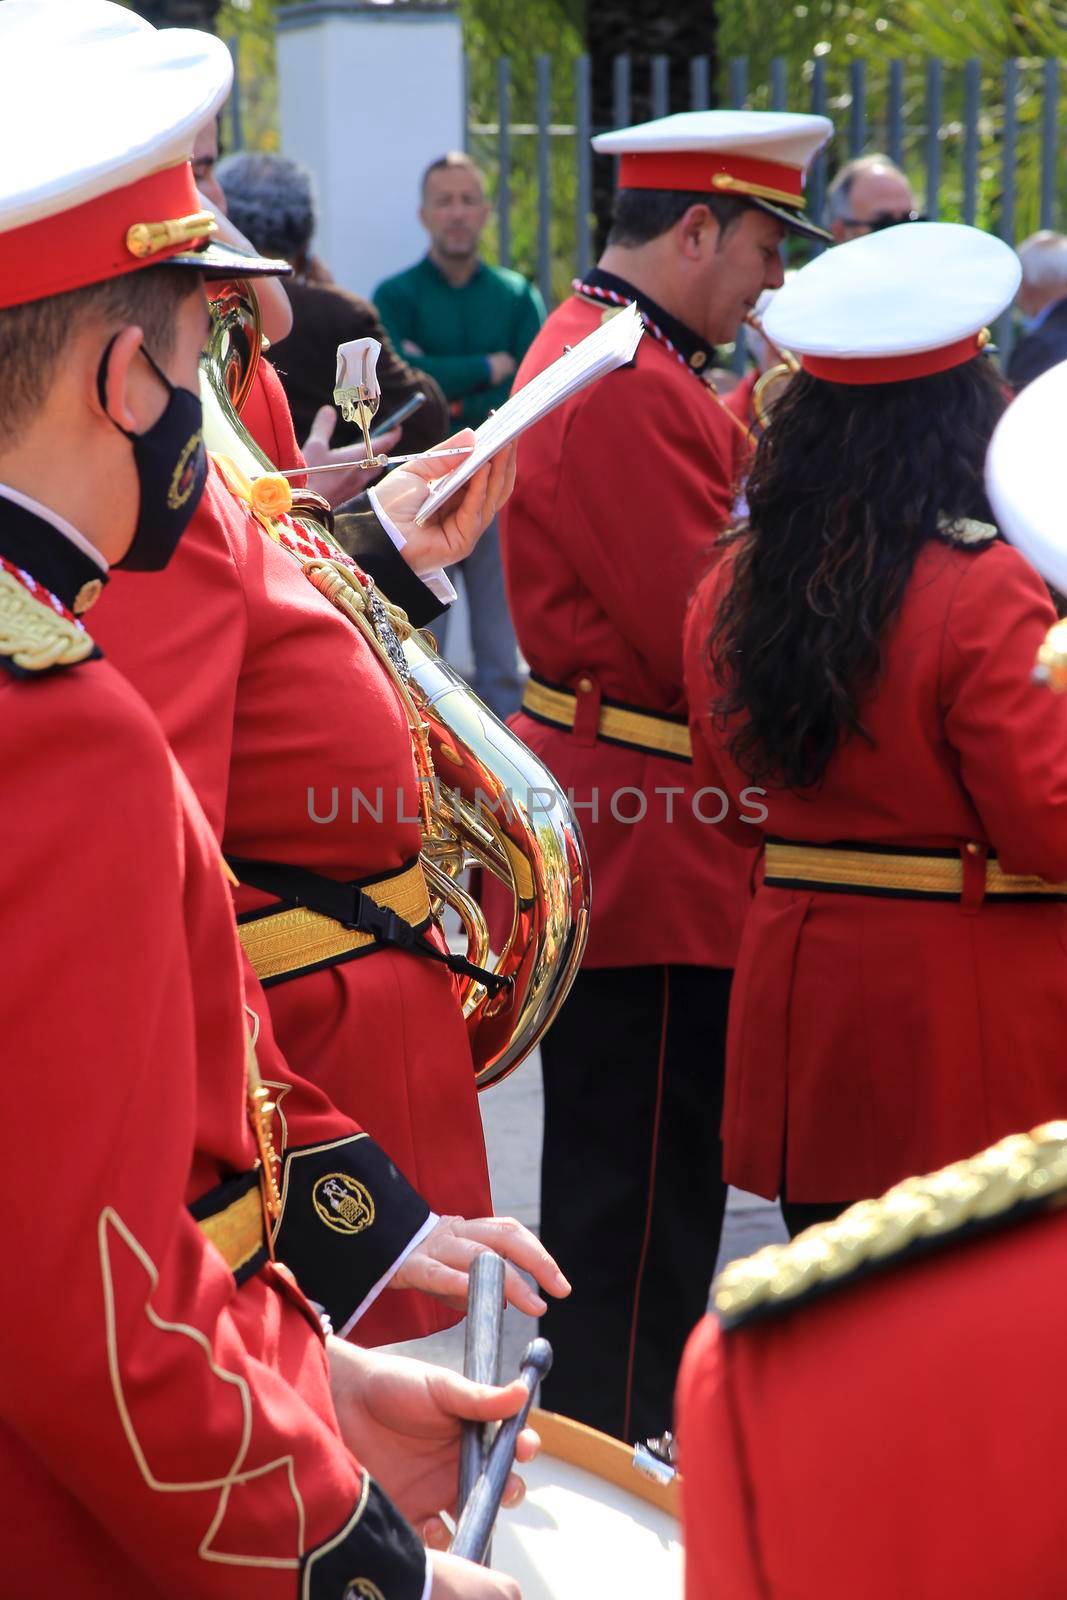 Musicians in uniform in the Holy Week by soniabonet